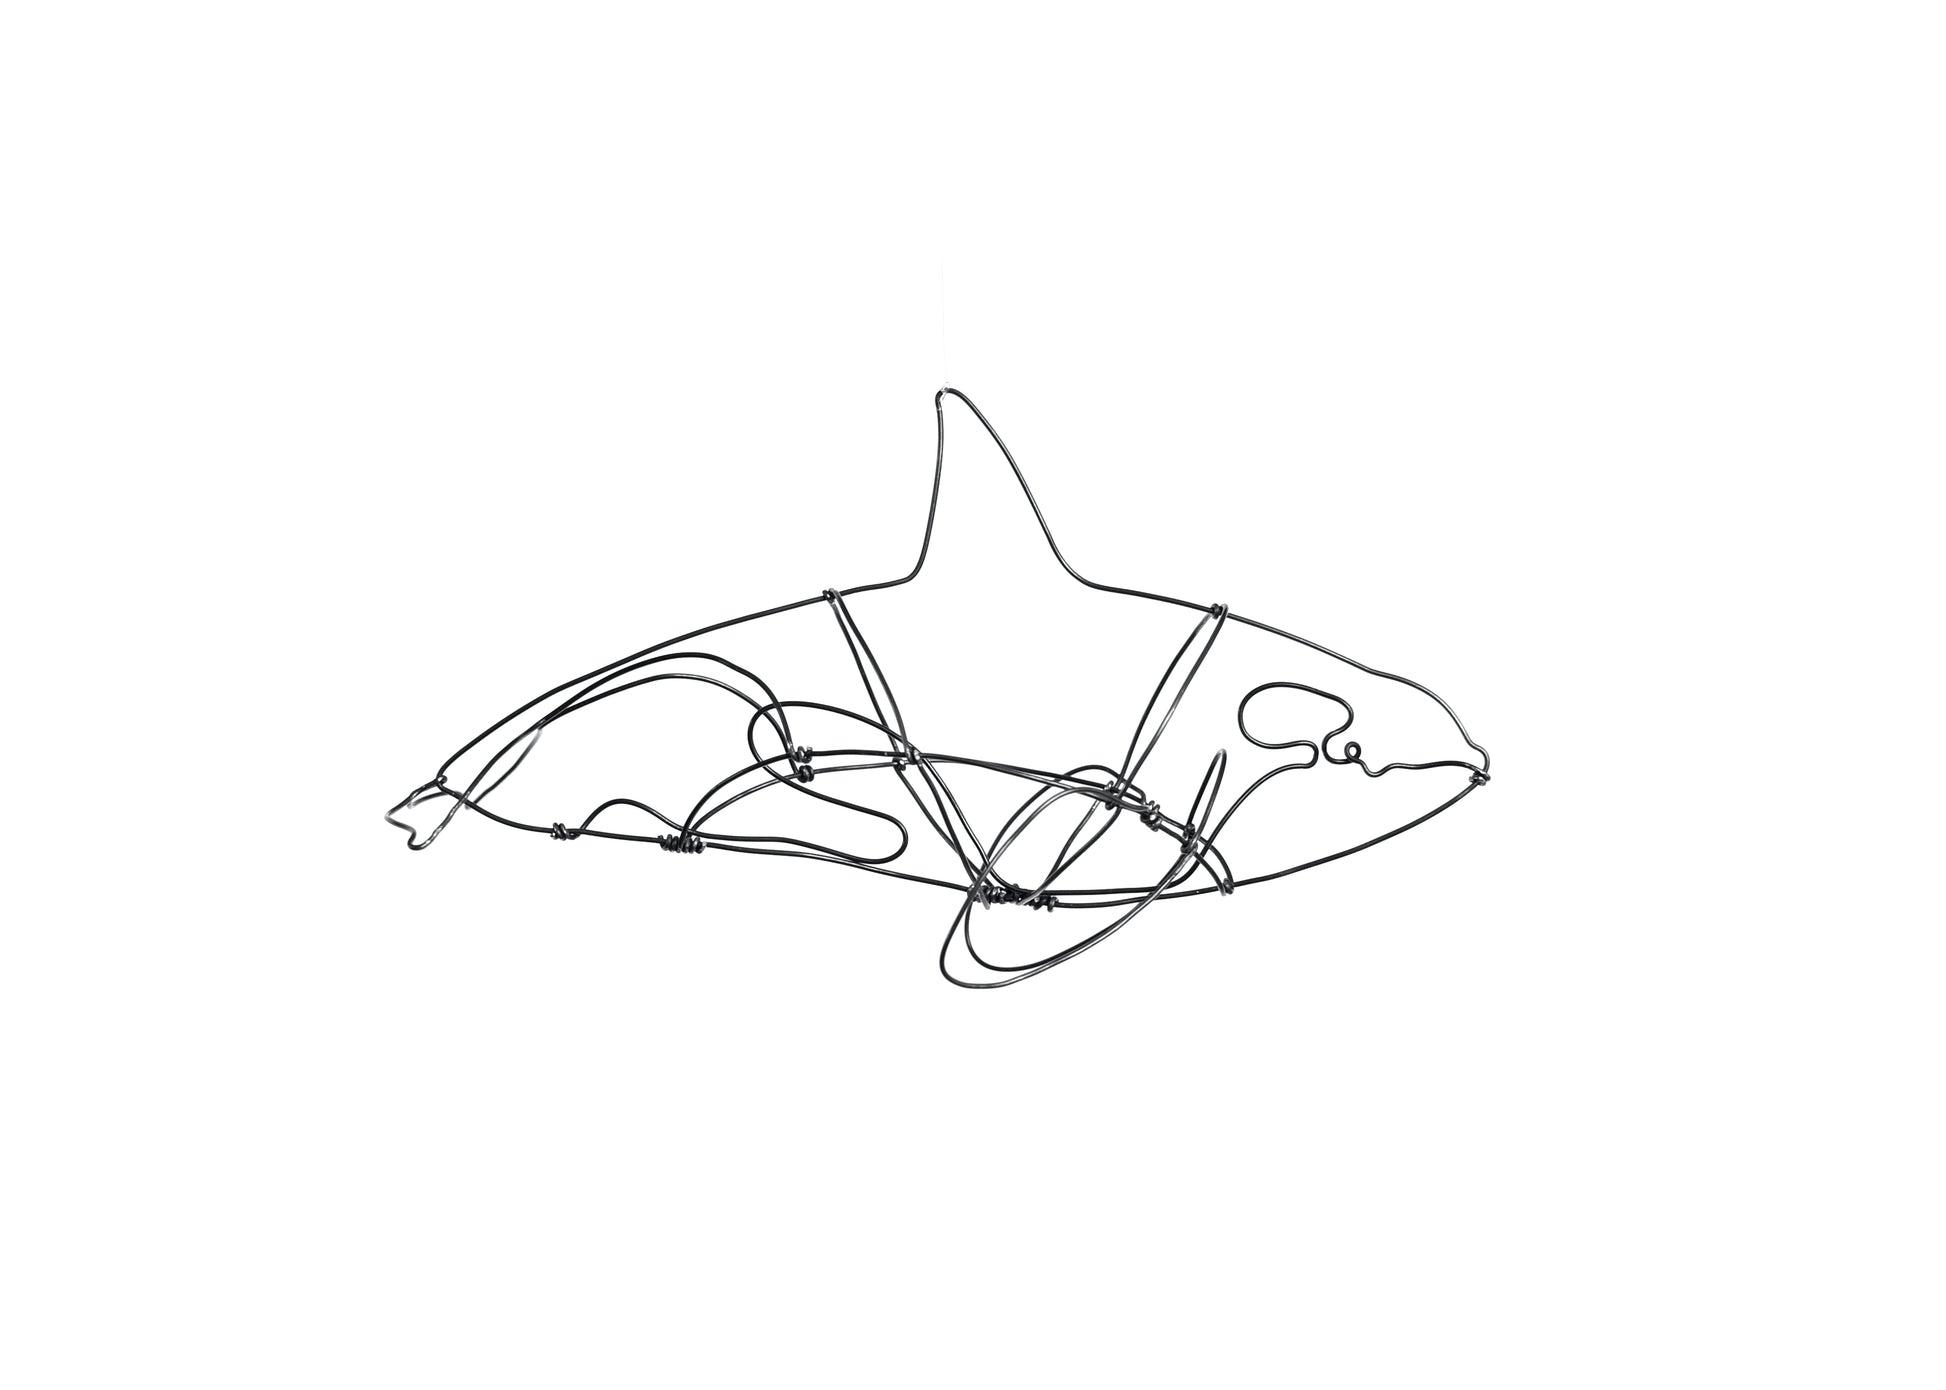 Photo of a 3D wire orca whale sculpture.